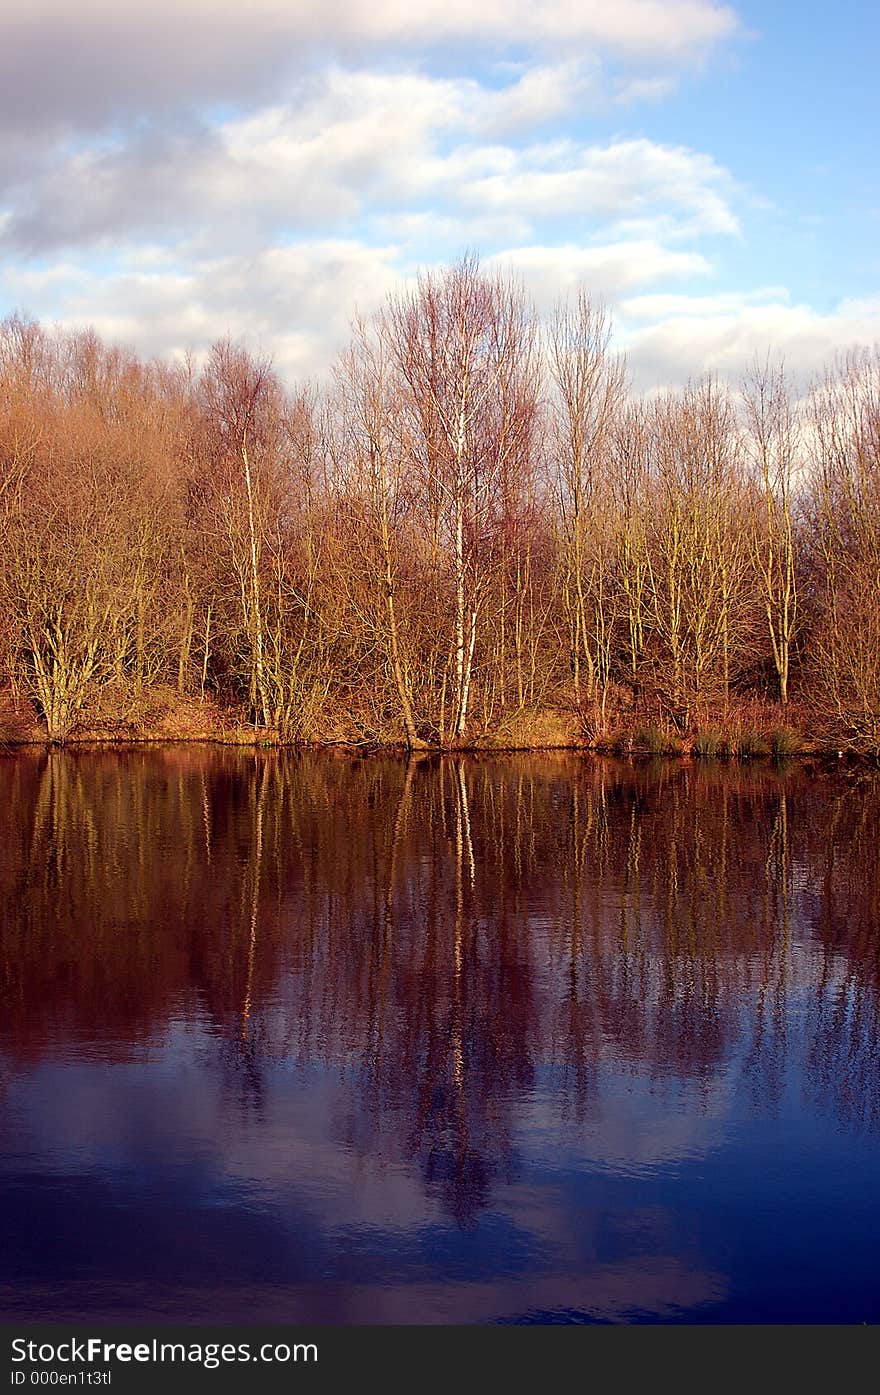 Reflection of trees by the side of a lake in winter. Reflection of trees by the side of a lake in winter